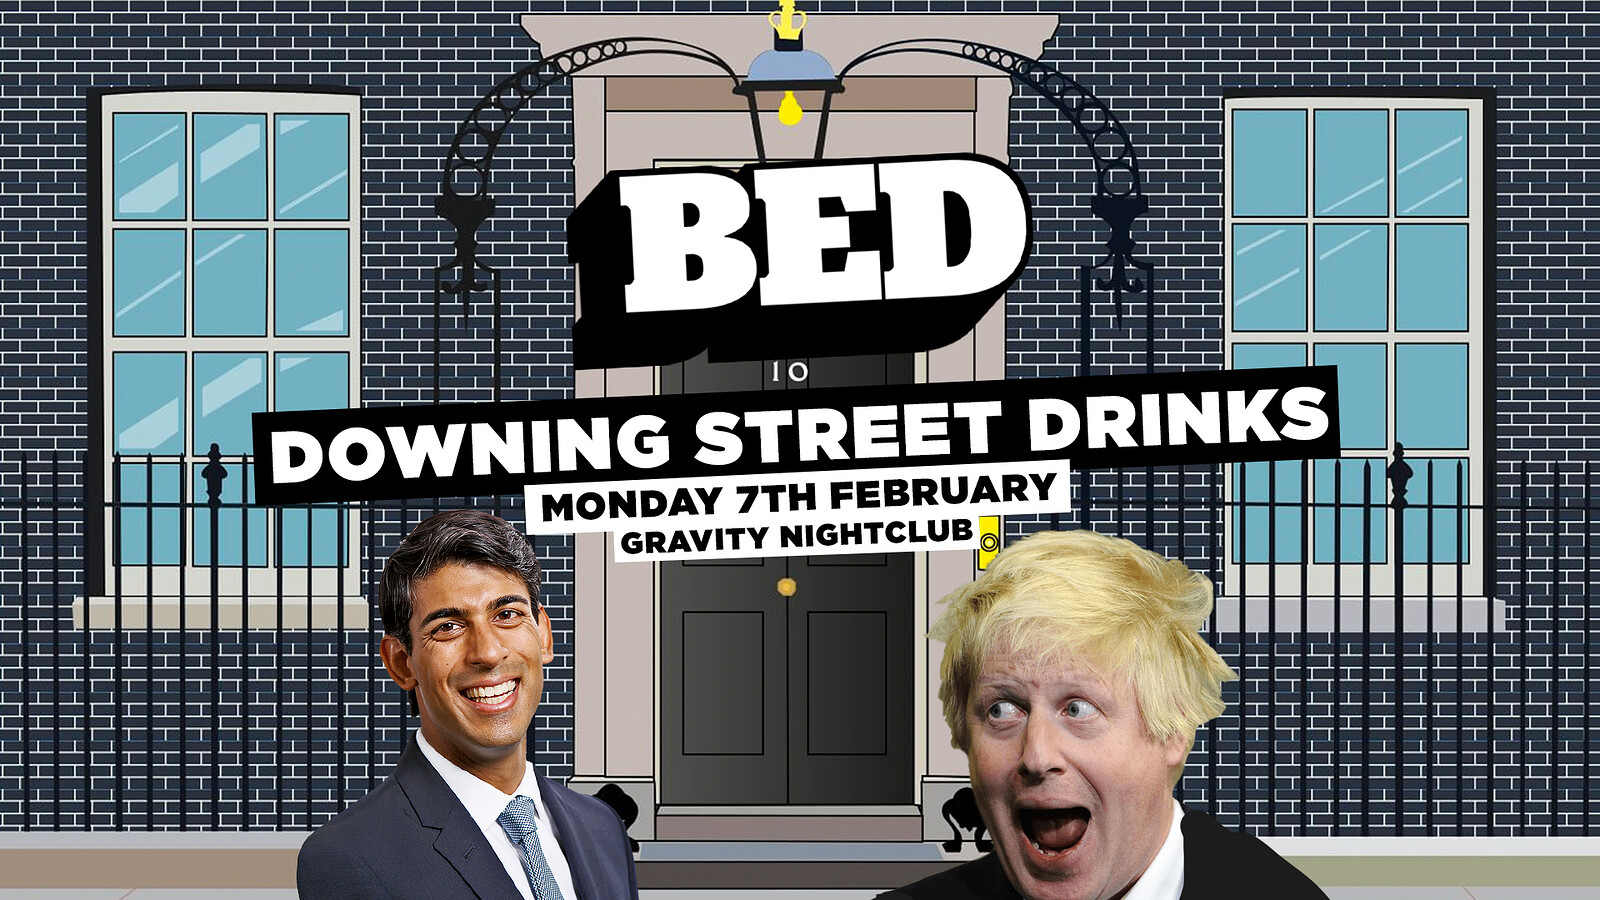 BED: Downing Street Drinks at Gravity